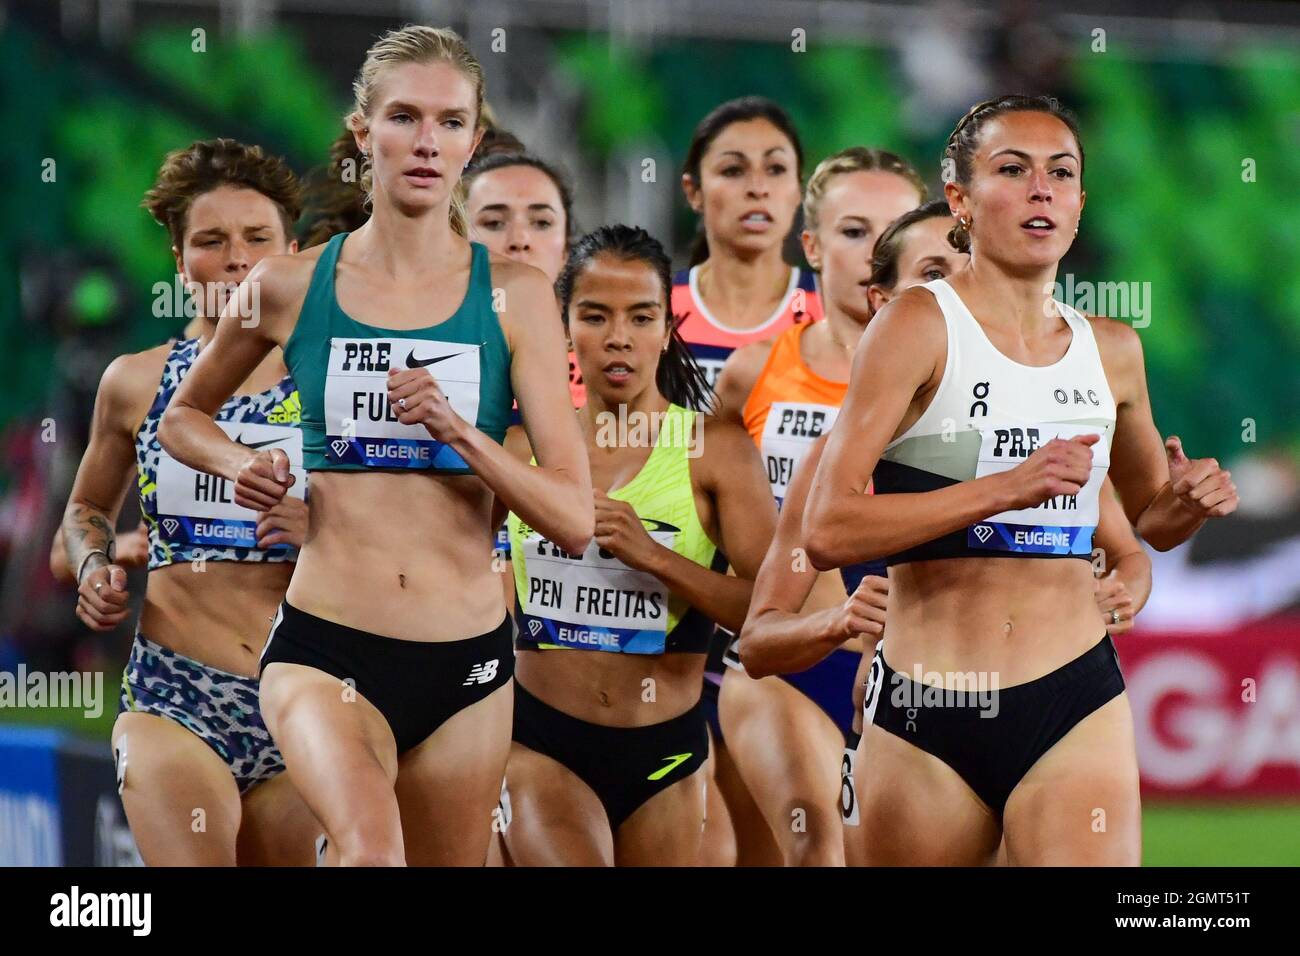 Sage Hurta (USA) finished the 1500m in 4:07.50 during the 46th Prefontaine Classic, Friday, Aug. 20, 2021, in Eugene, Ore. (Dylan Stewart/Image of Spo Stock Photo